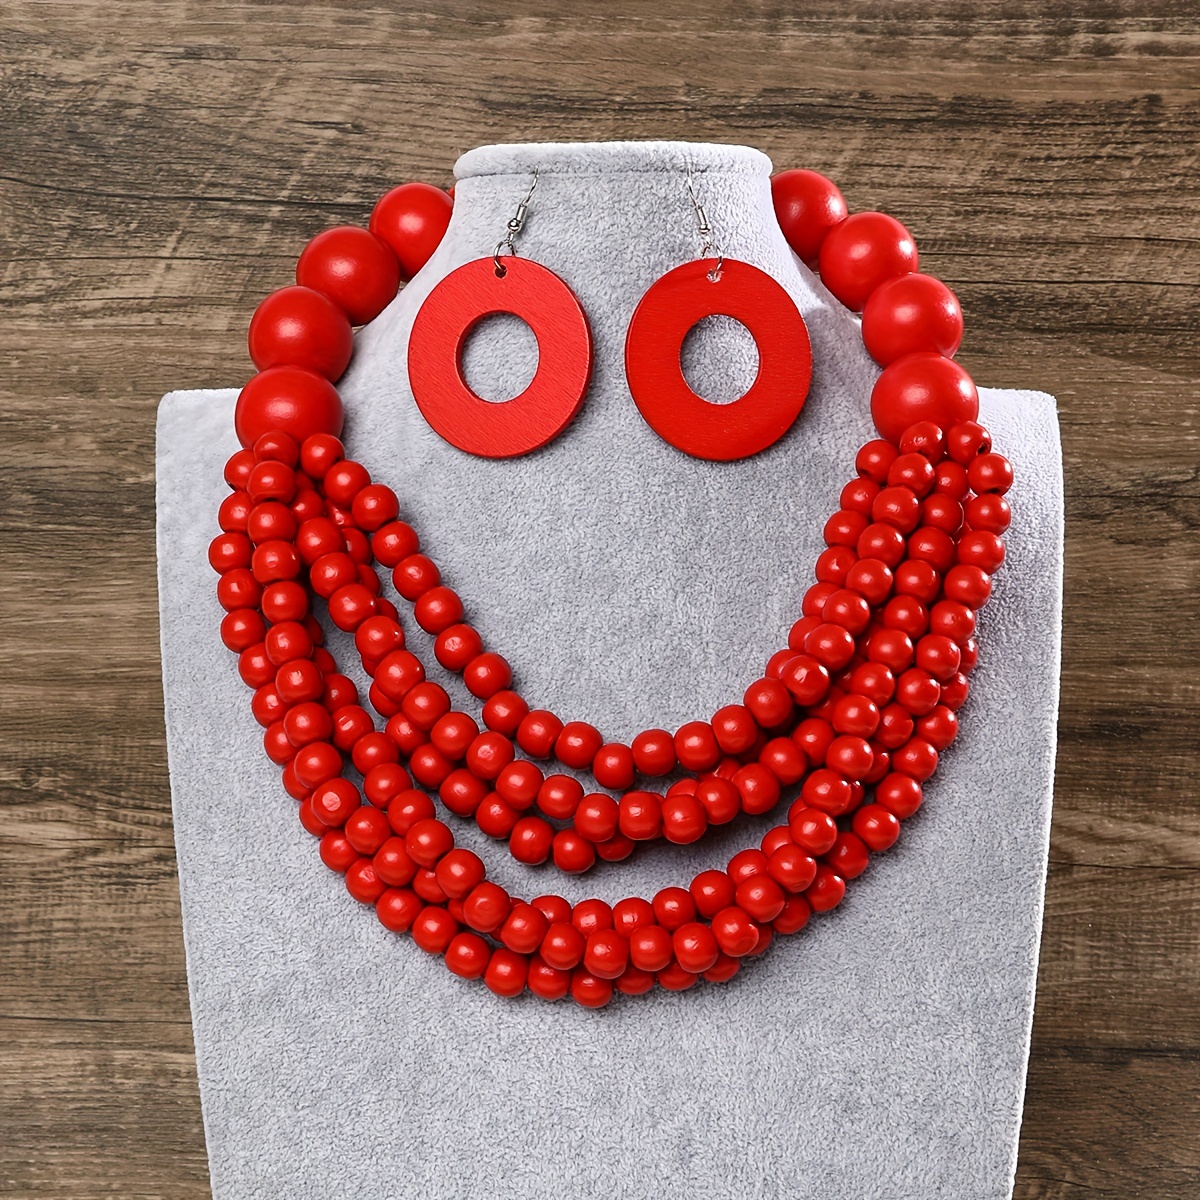 Handmade necklace - Yellow/Red